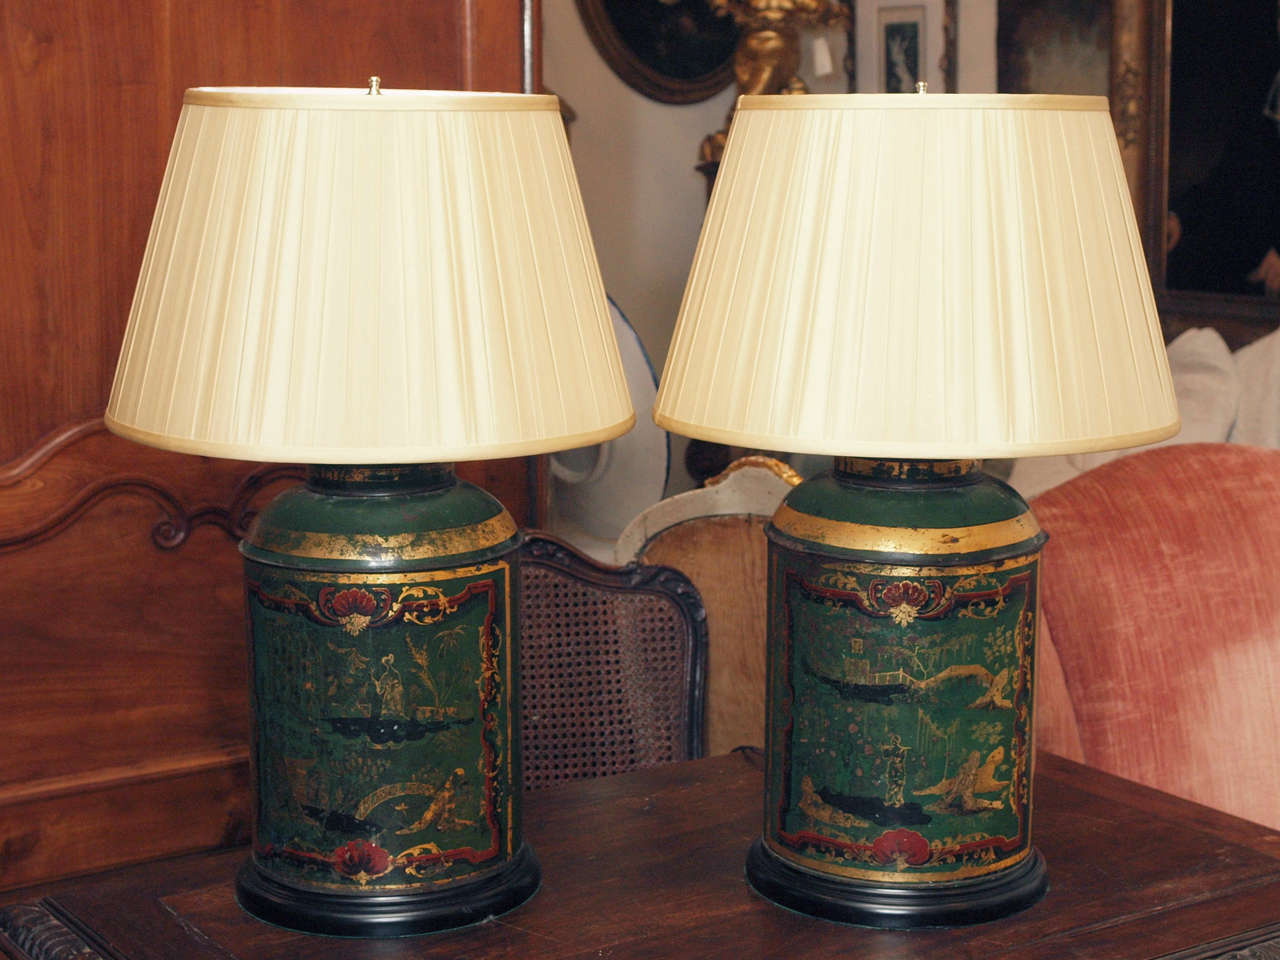 Pair of French Tea Tins in parrot green with gilt, black and rouge decoration in the Chinese taste.
having silk shades and wooden bases. now wired for US current.